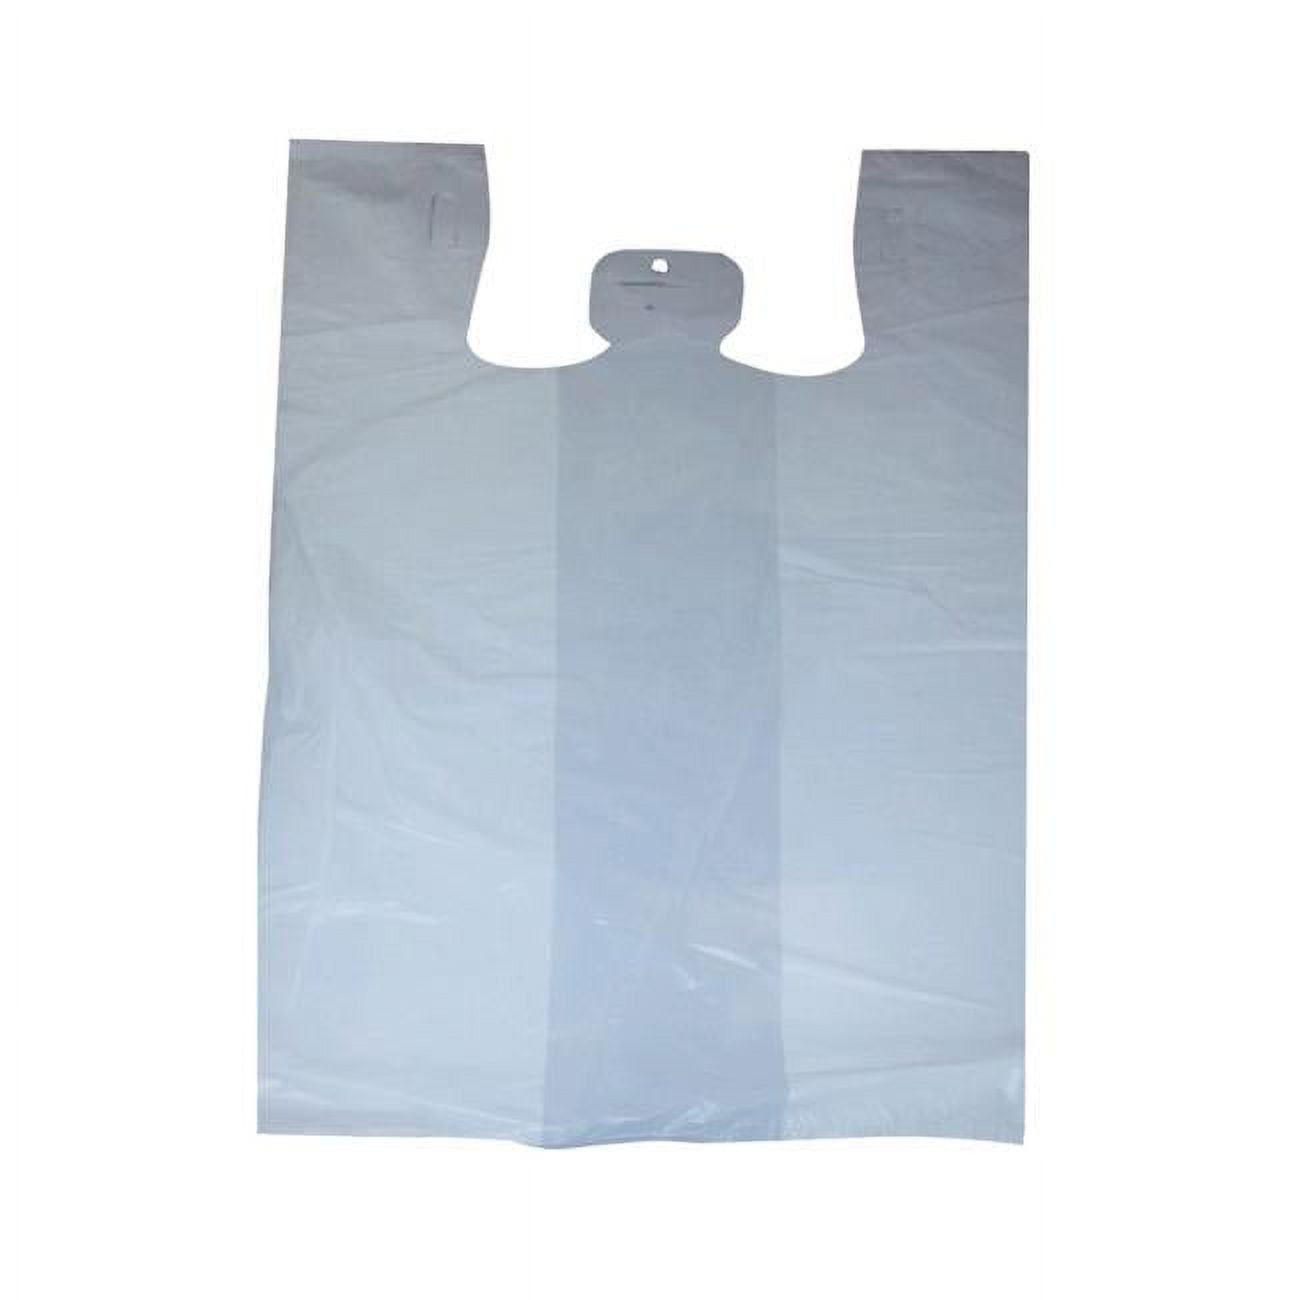 Nlpp16pw Pe White T-shirt Bag, 11 X 6 X 21 In. - Pack Of 1000